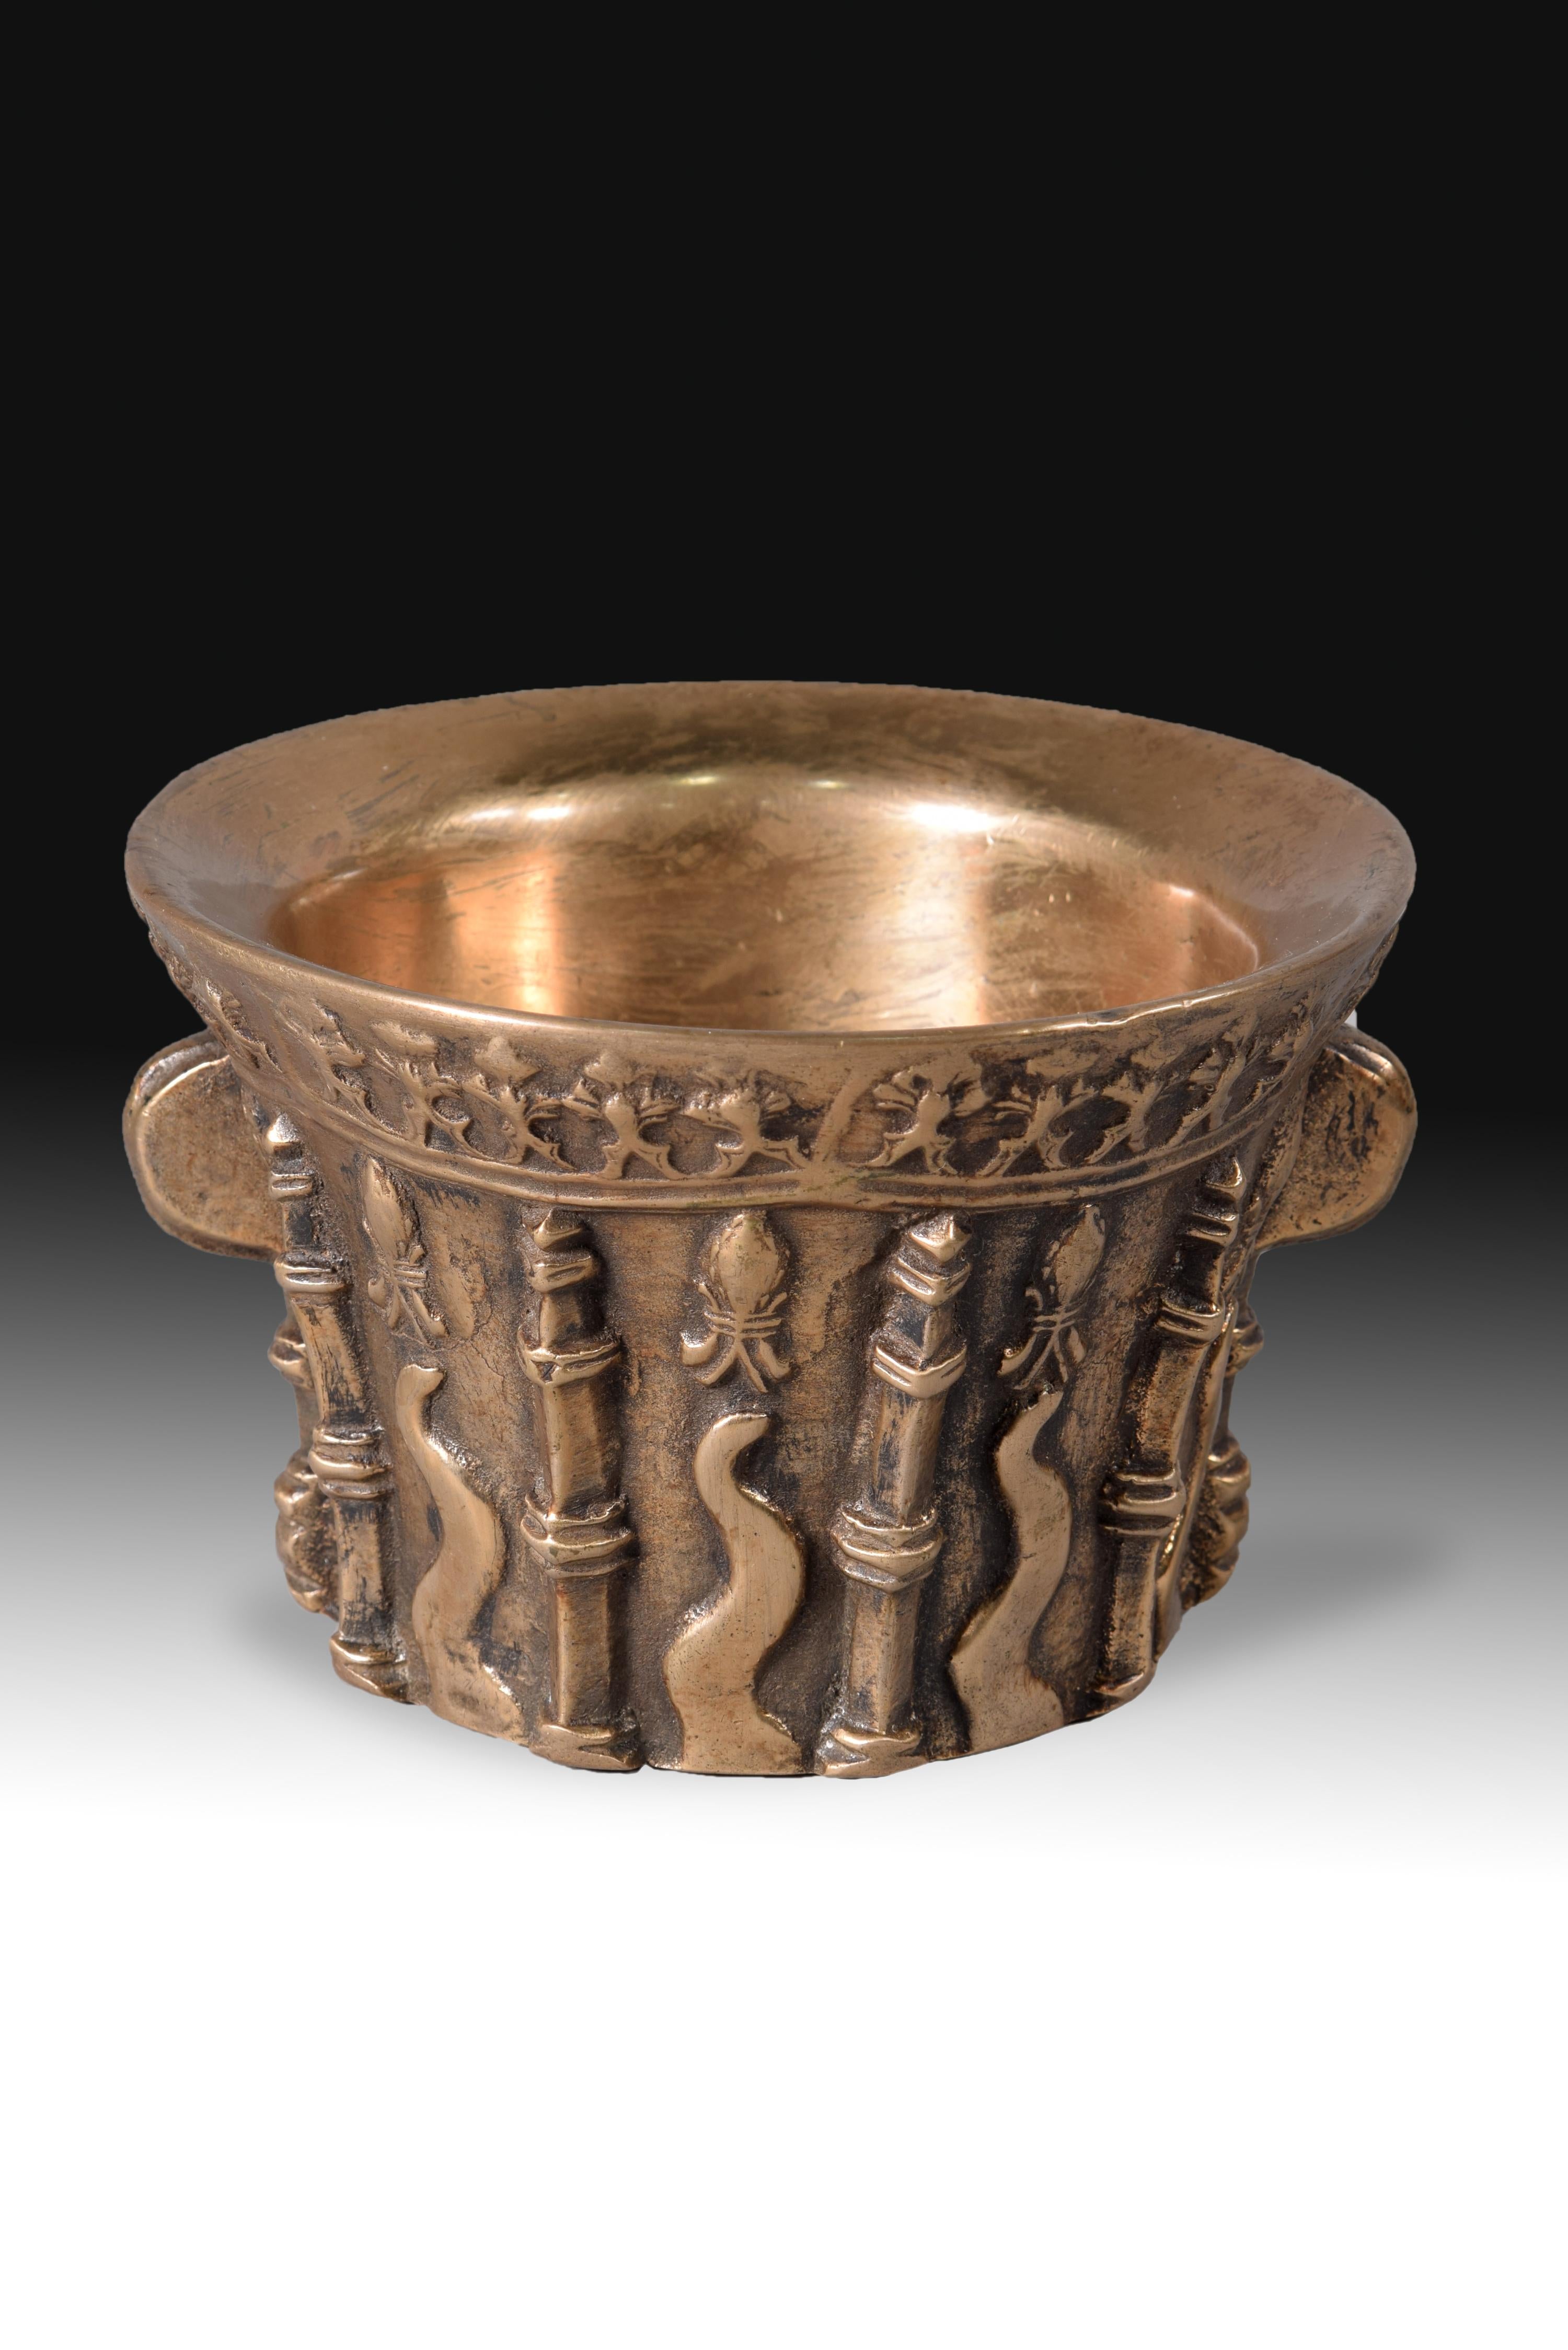 Mortar. Bronze. XVII century. 
 Cylindrical bronze mortar with hollowed-out mouth, two solid semicircular handles on the sides and a relief decoration composed of a band at the top (reminiscent of Gothic crests in rhythm), a band below and a